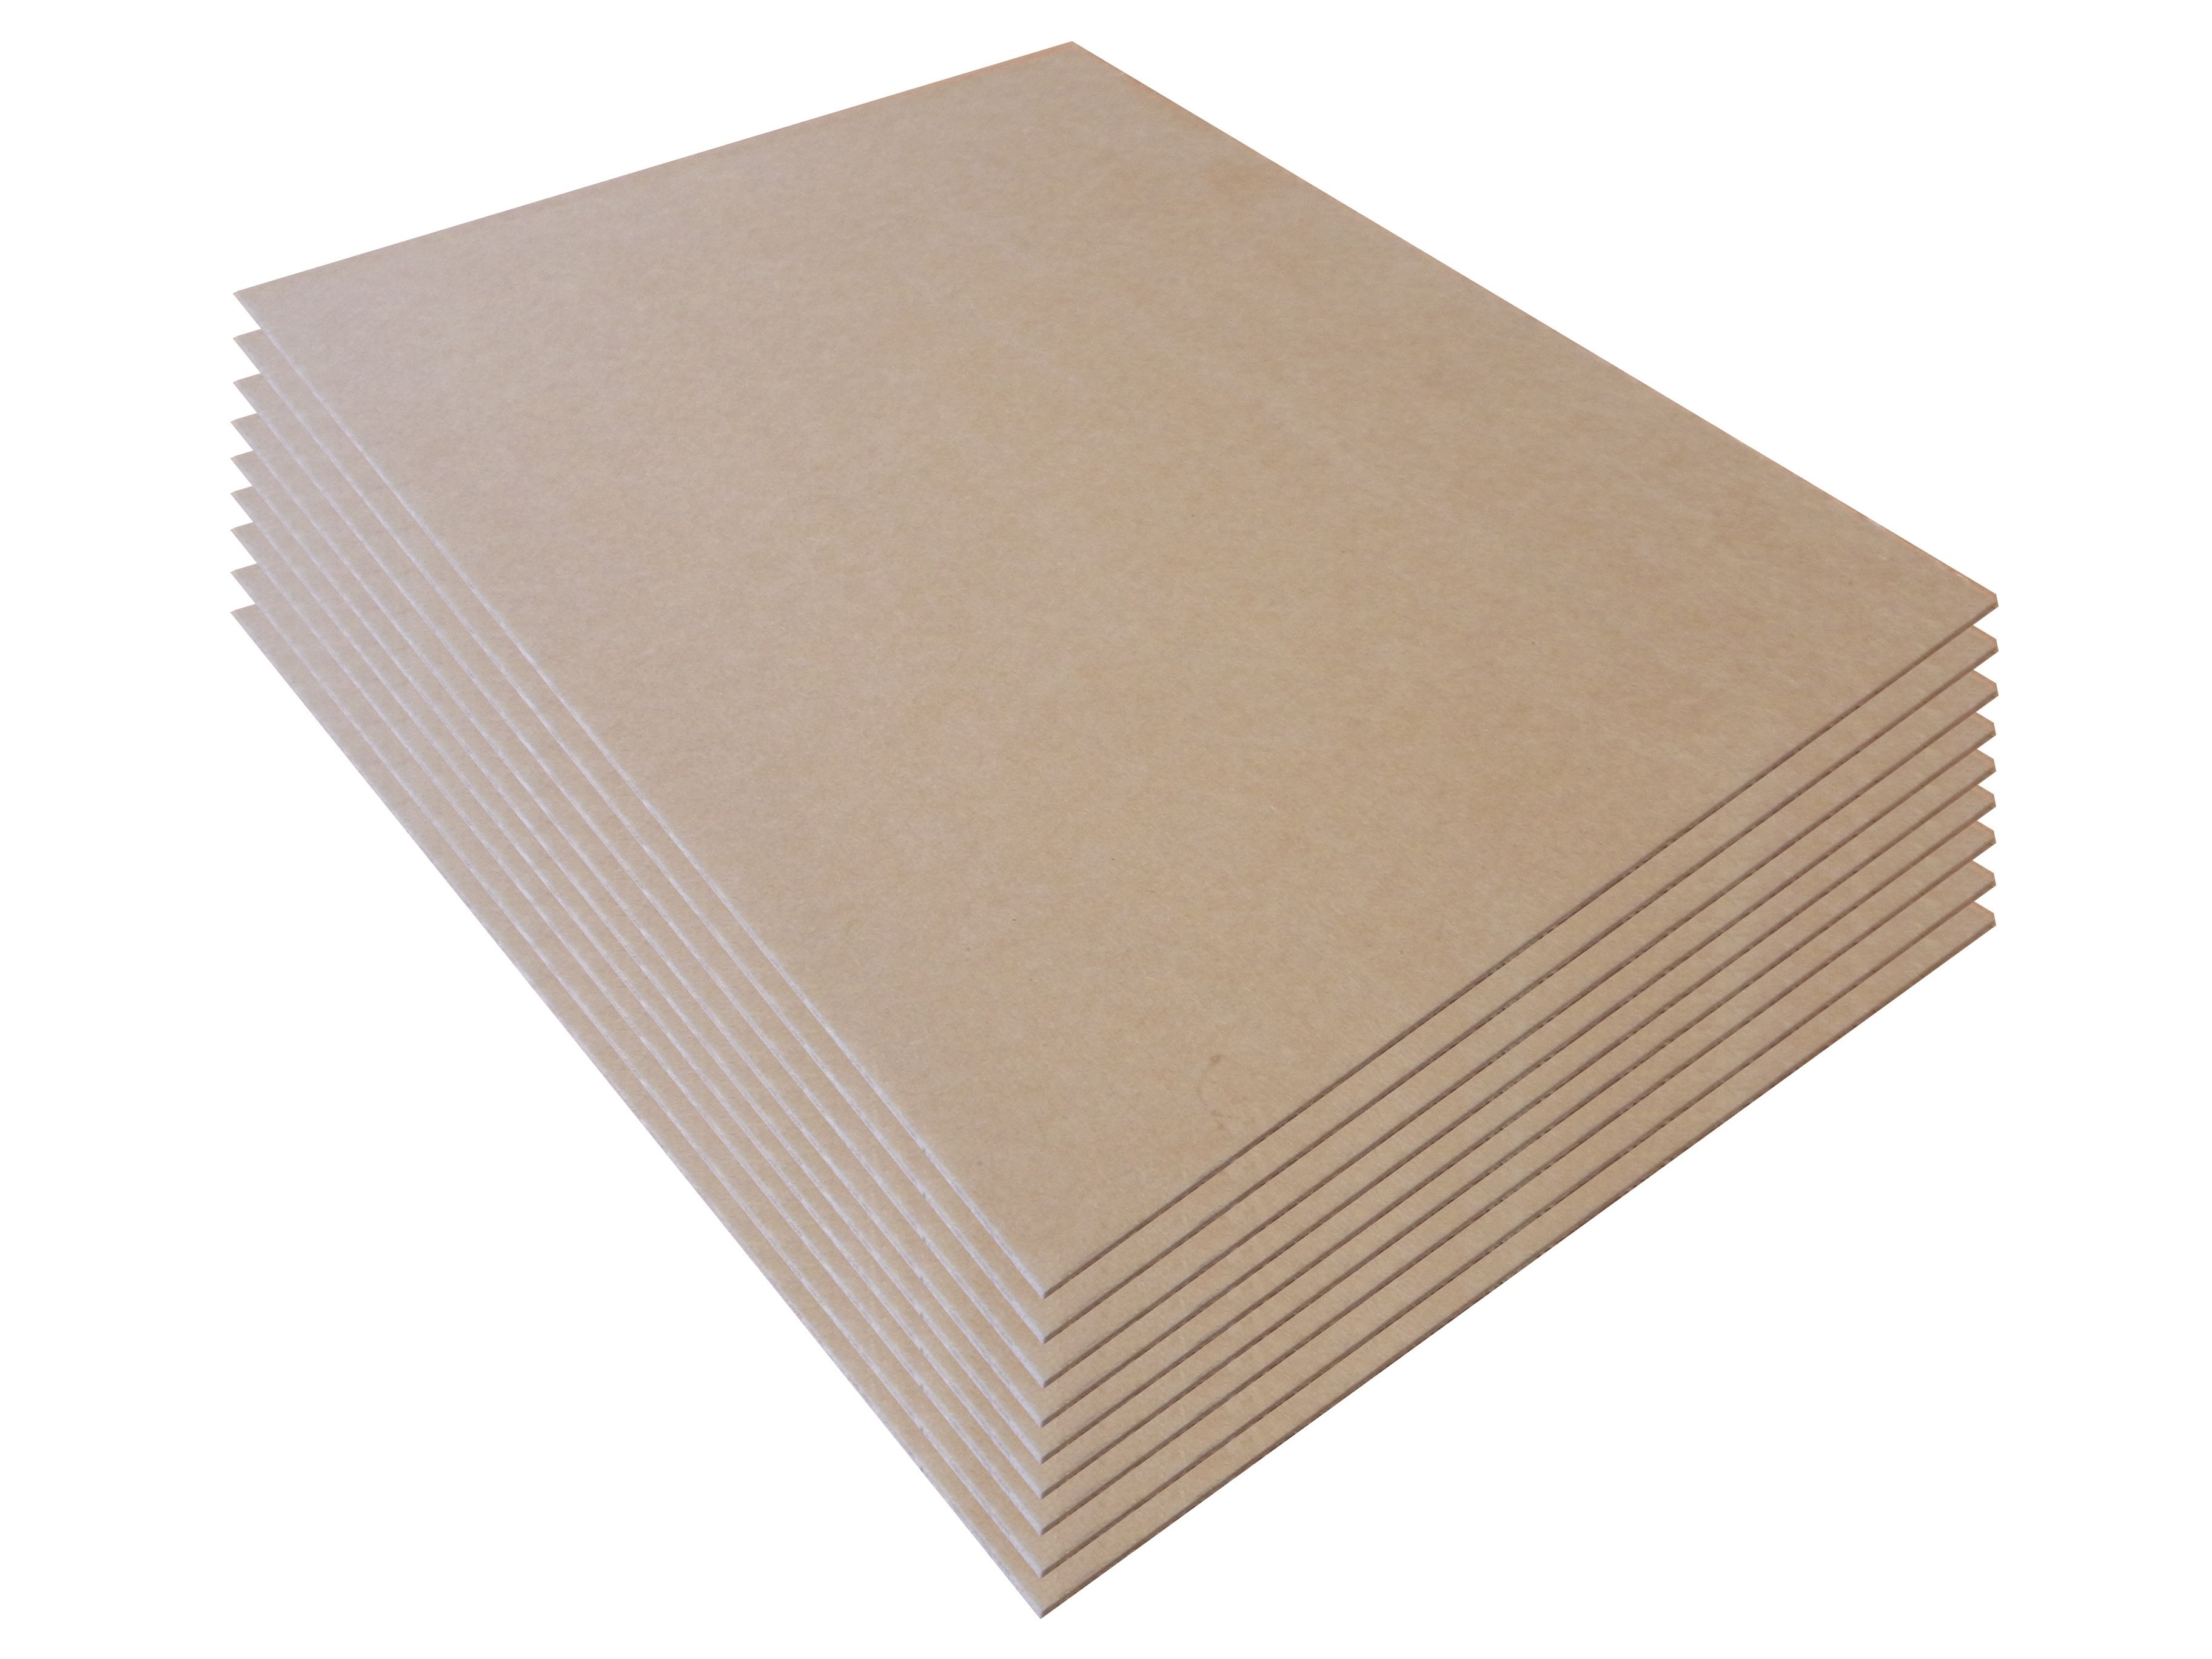 Backing Board 500 x 230mm - 10 pack